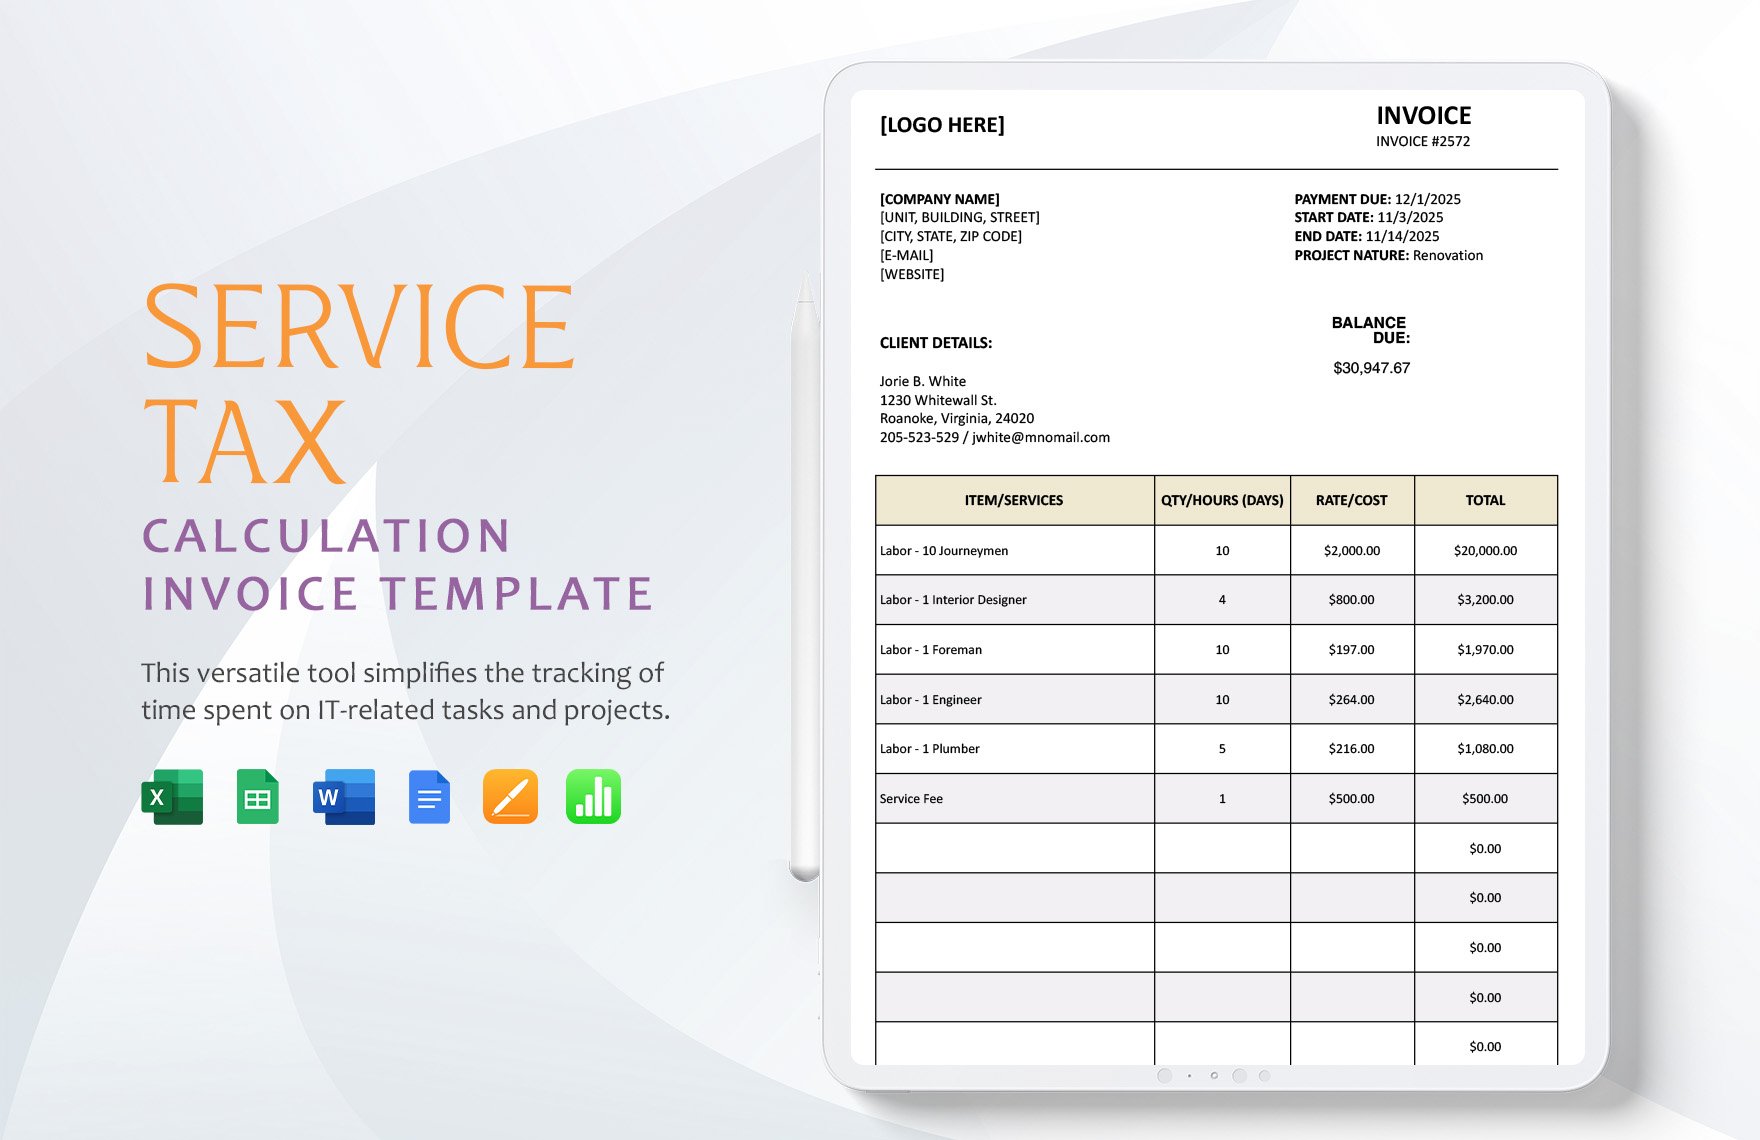 Service Tax Calculation Invoice Template in Word, Google Docs, Excel, Google Sheets, Apple Pages, Apple Numbers